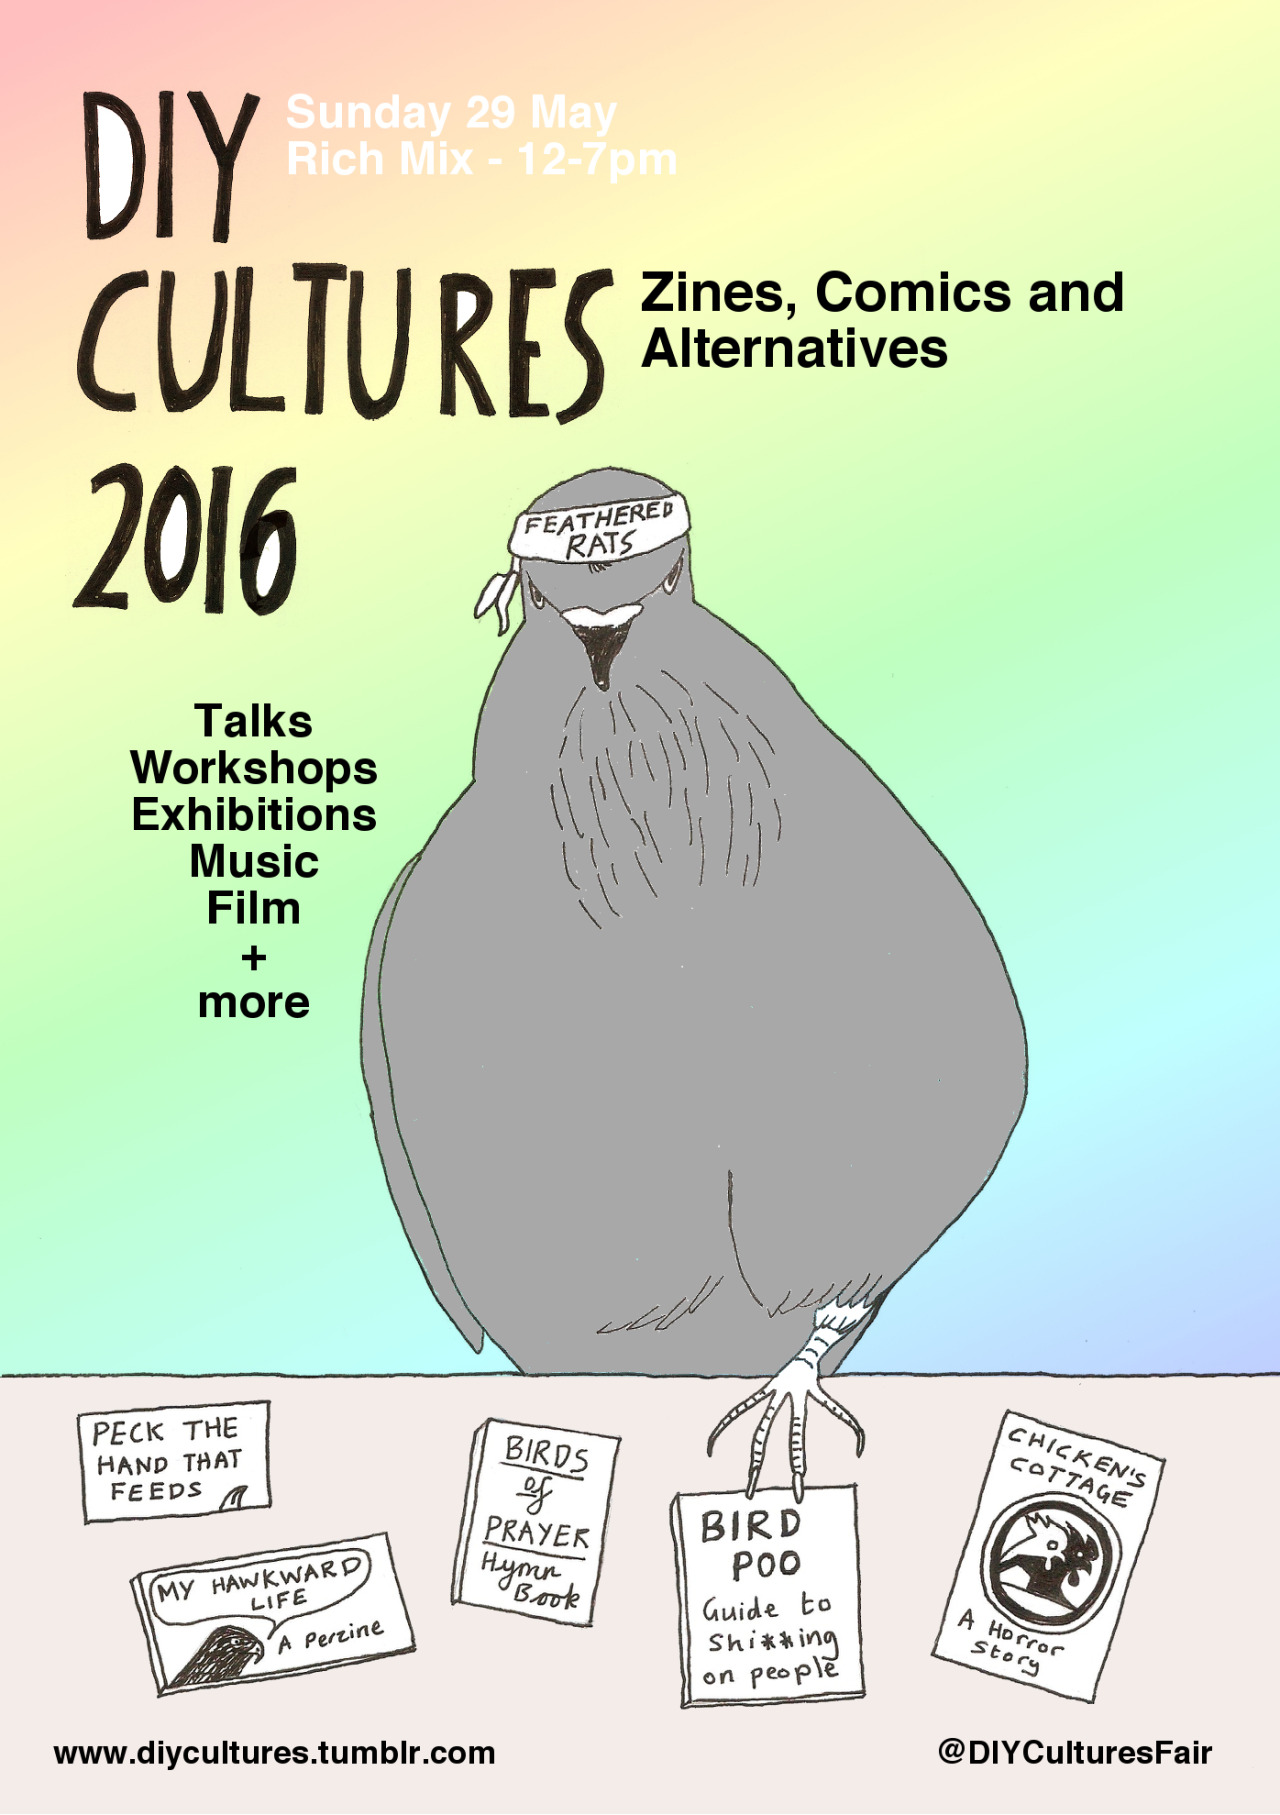 We’re extremely excited to announce that DIY Cultures will returning to Rich Mix for a 4th year on 29th May! Apply for table space!! https://www.facebook.com/events/1122363277796492/ Call for Zines, Artists books, Illustrations, Comics, Distros, Film...